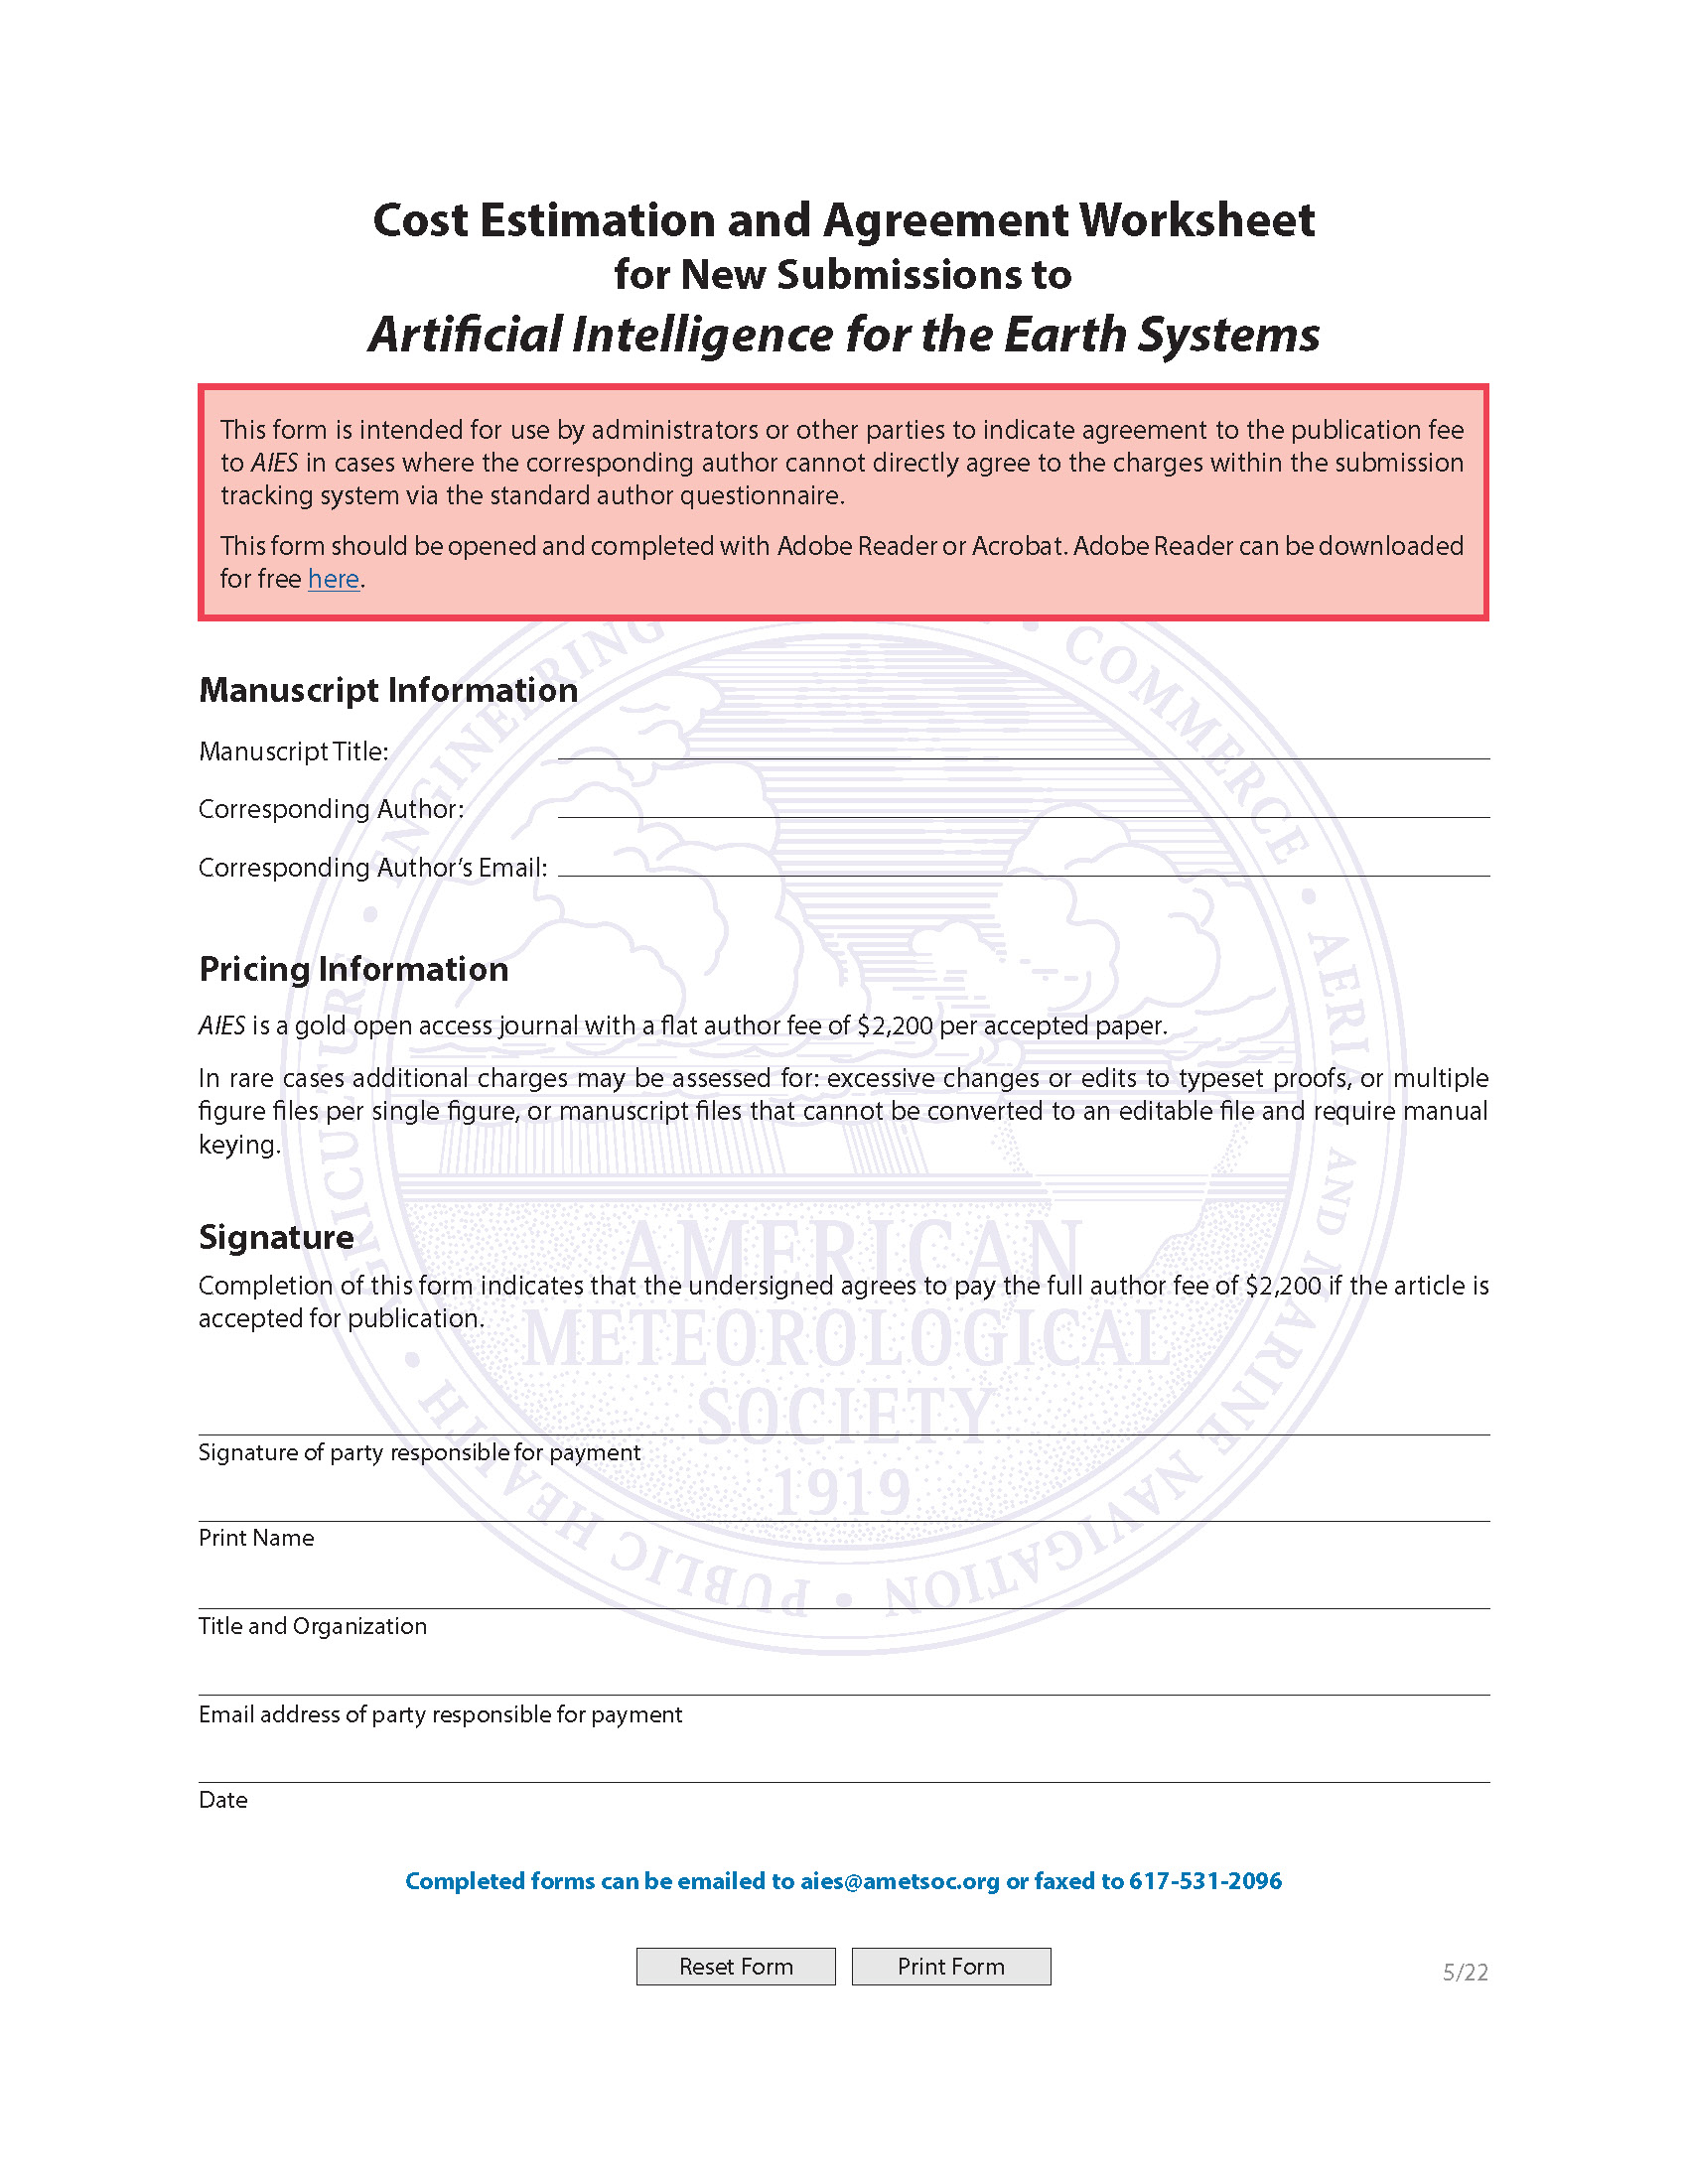 Download the AIES Cost Estimation and Agreement Worksheet as a PDF